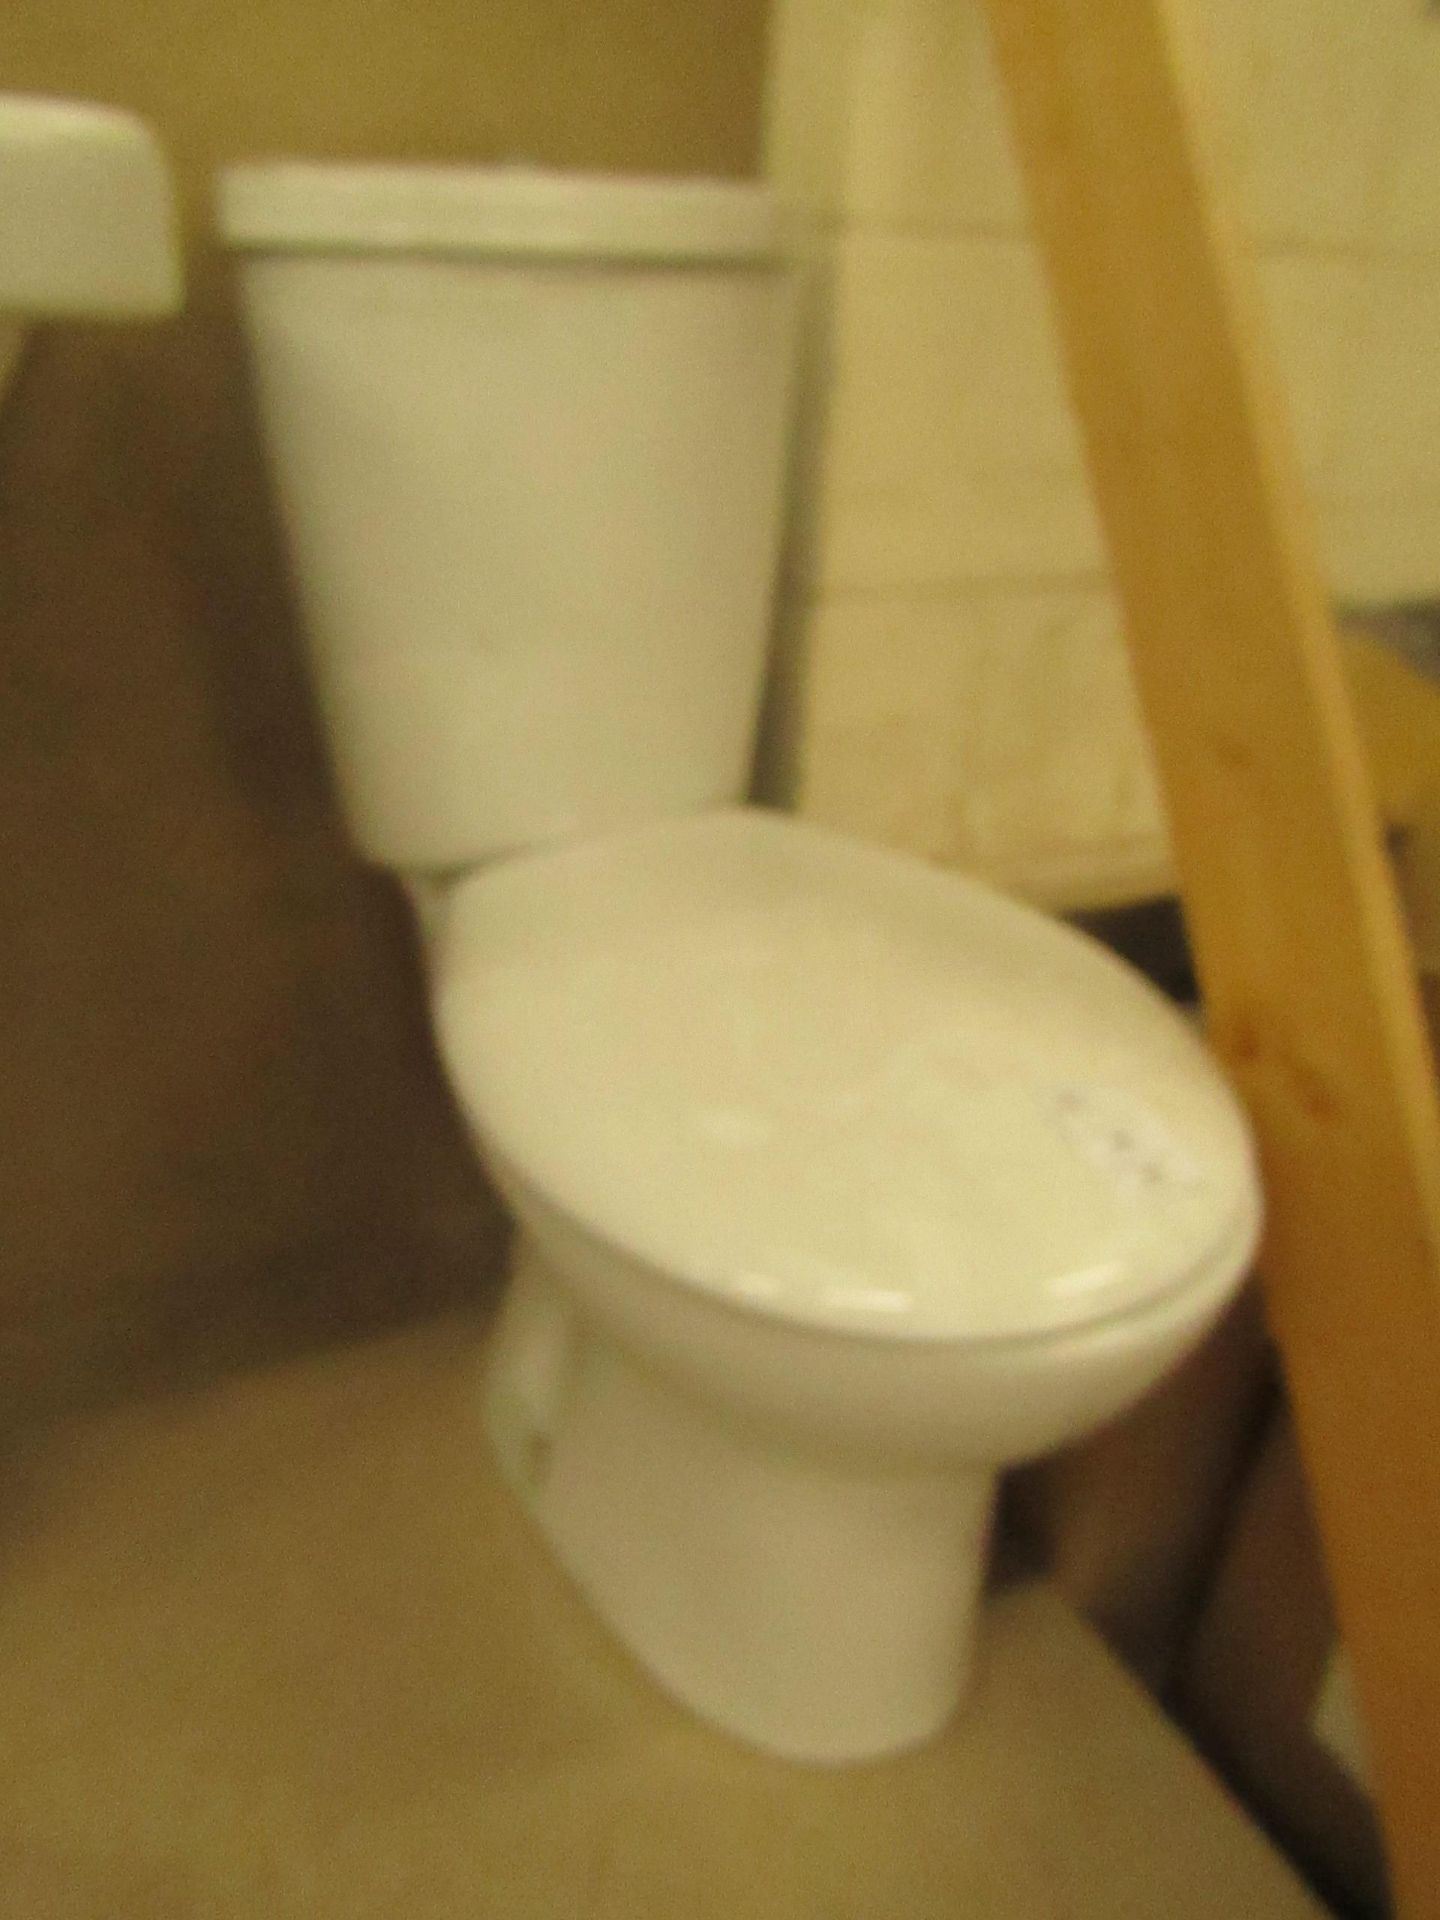 Complete Unbranded Roca toilet set that includes a complete close coupled toilet with flush and